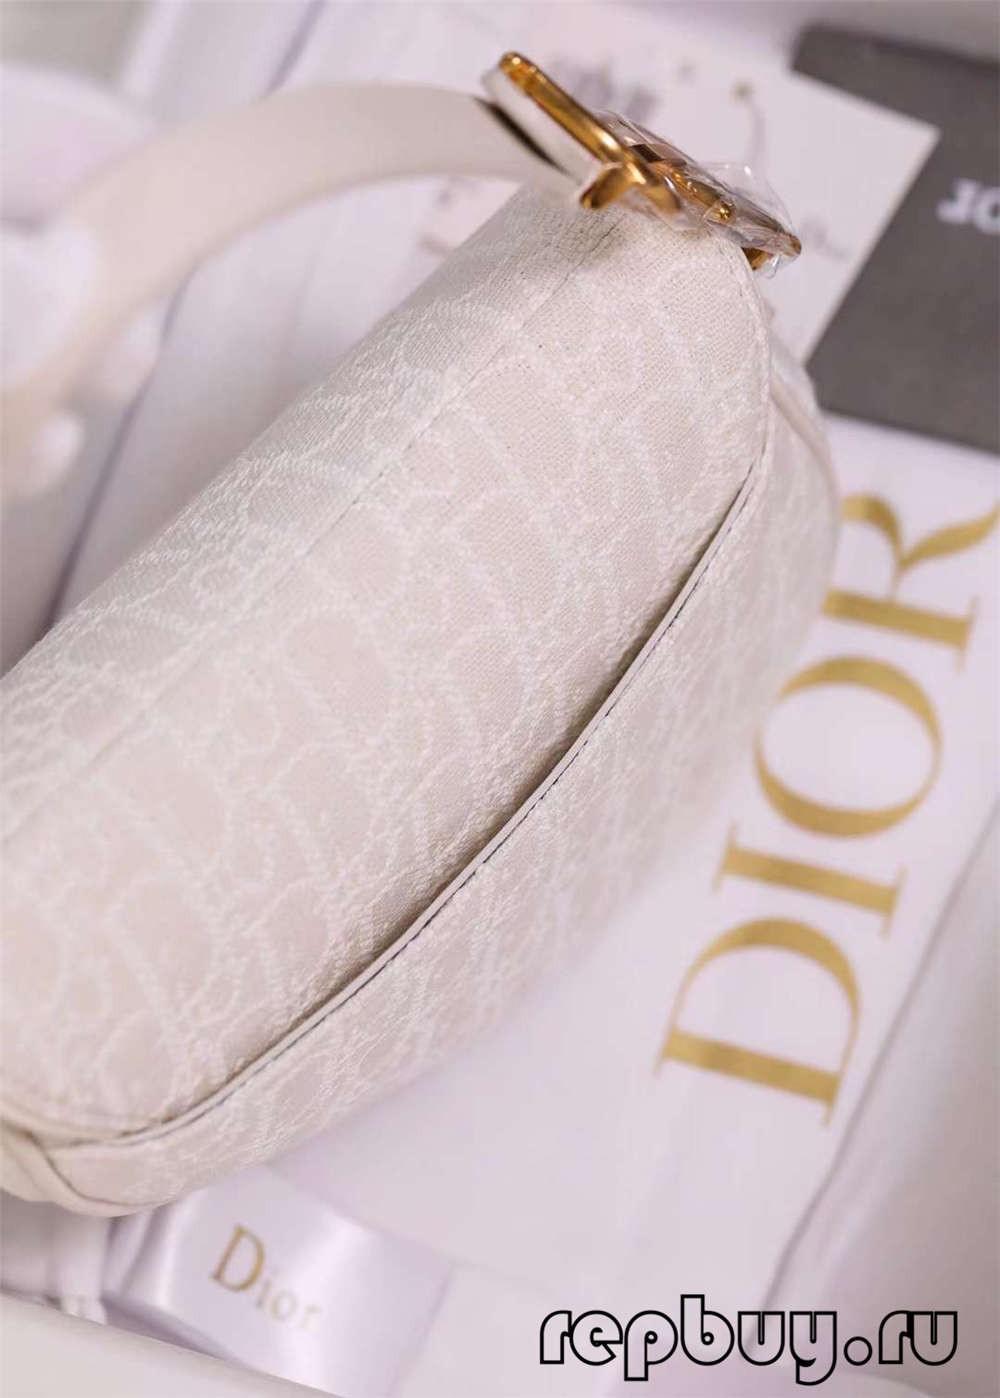 Dior Top Replica Bags White Saddle Bag 21cm Small Craft Details (2022 Latest)-Best Quality Fake designer Bag Review, Replica designer bag ru